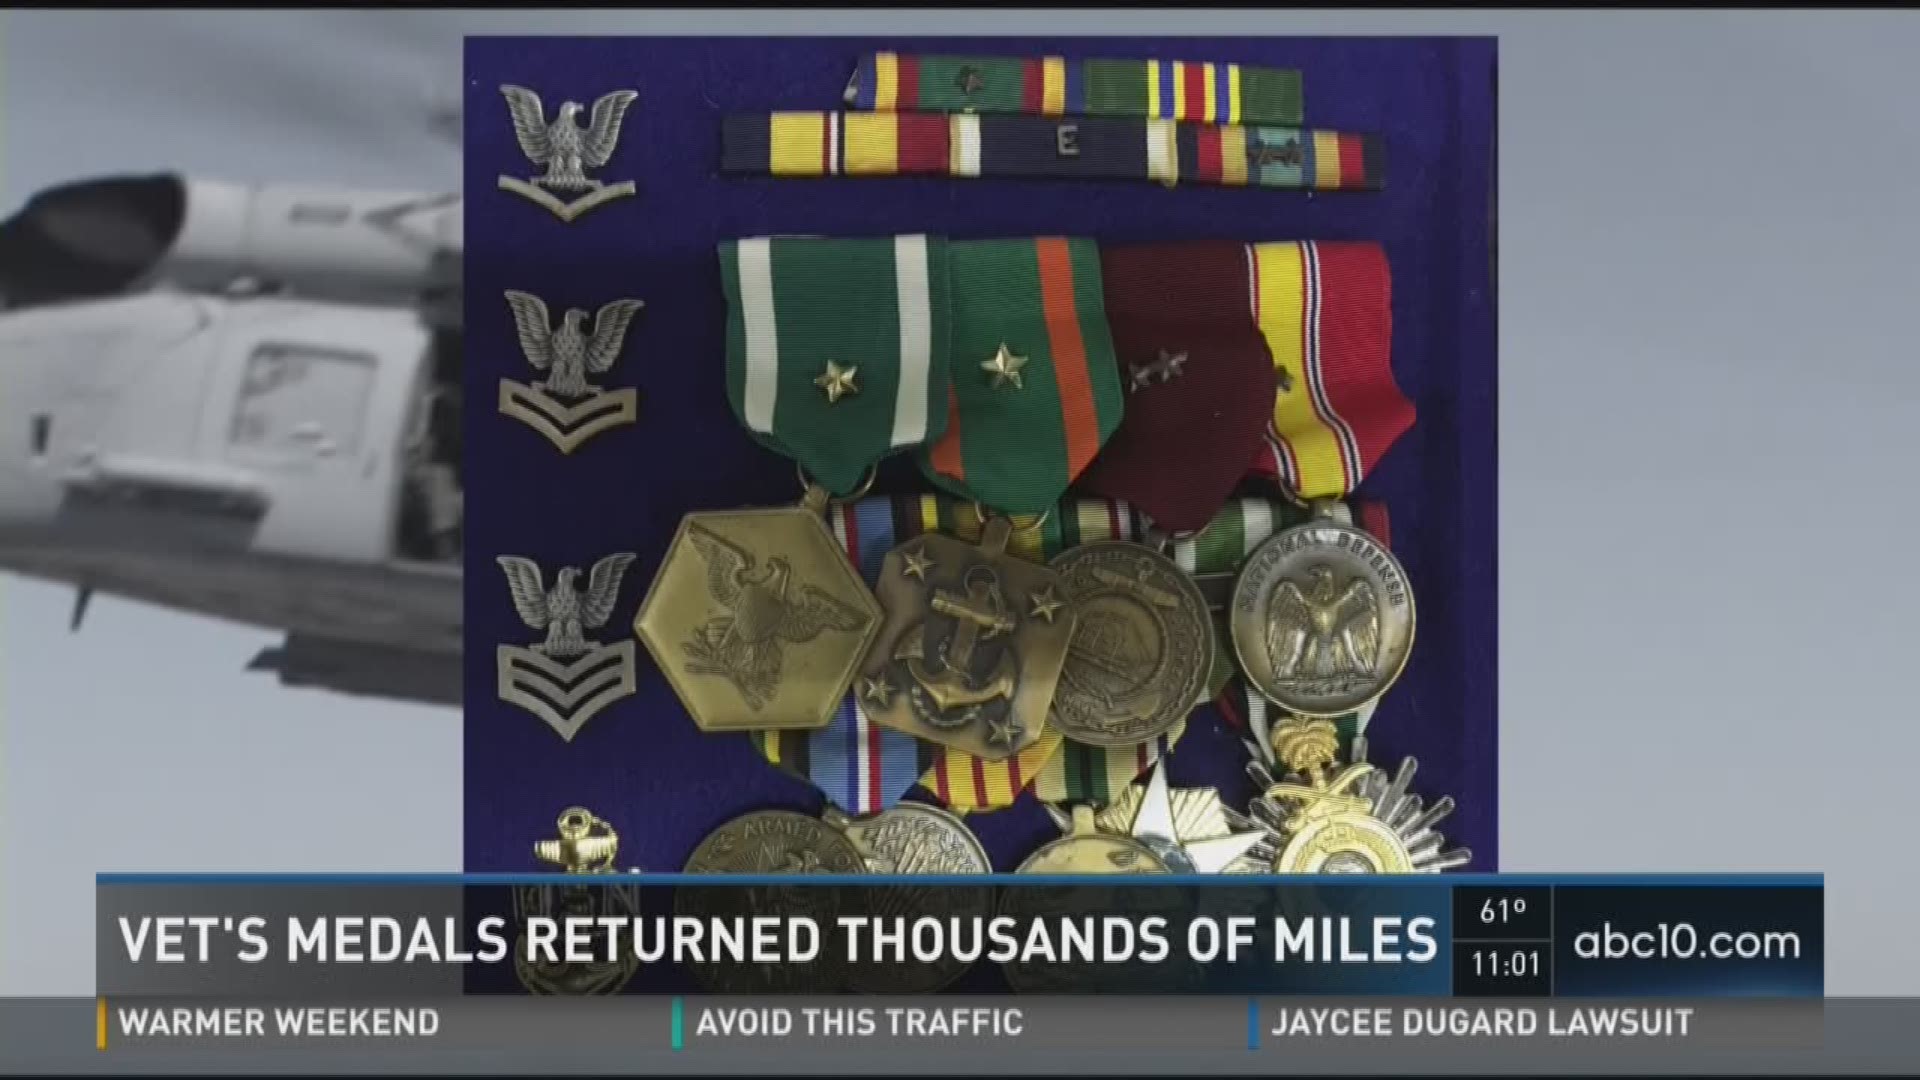 Navy veteran's stolen medals found by Modesto police. Police sent the medals 2,300 miles to Alabama to return to owner.